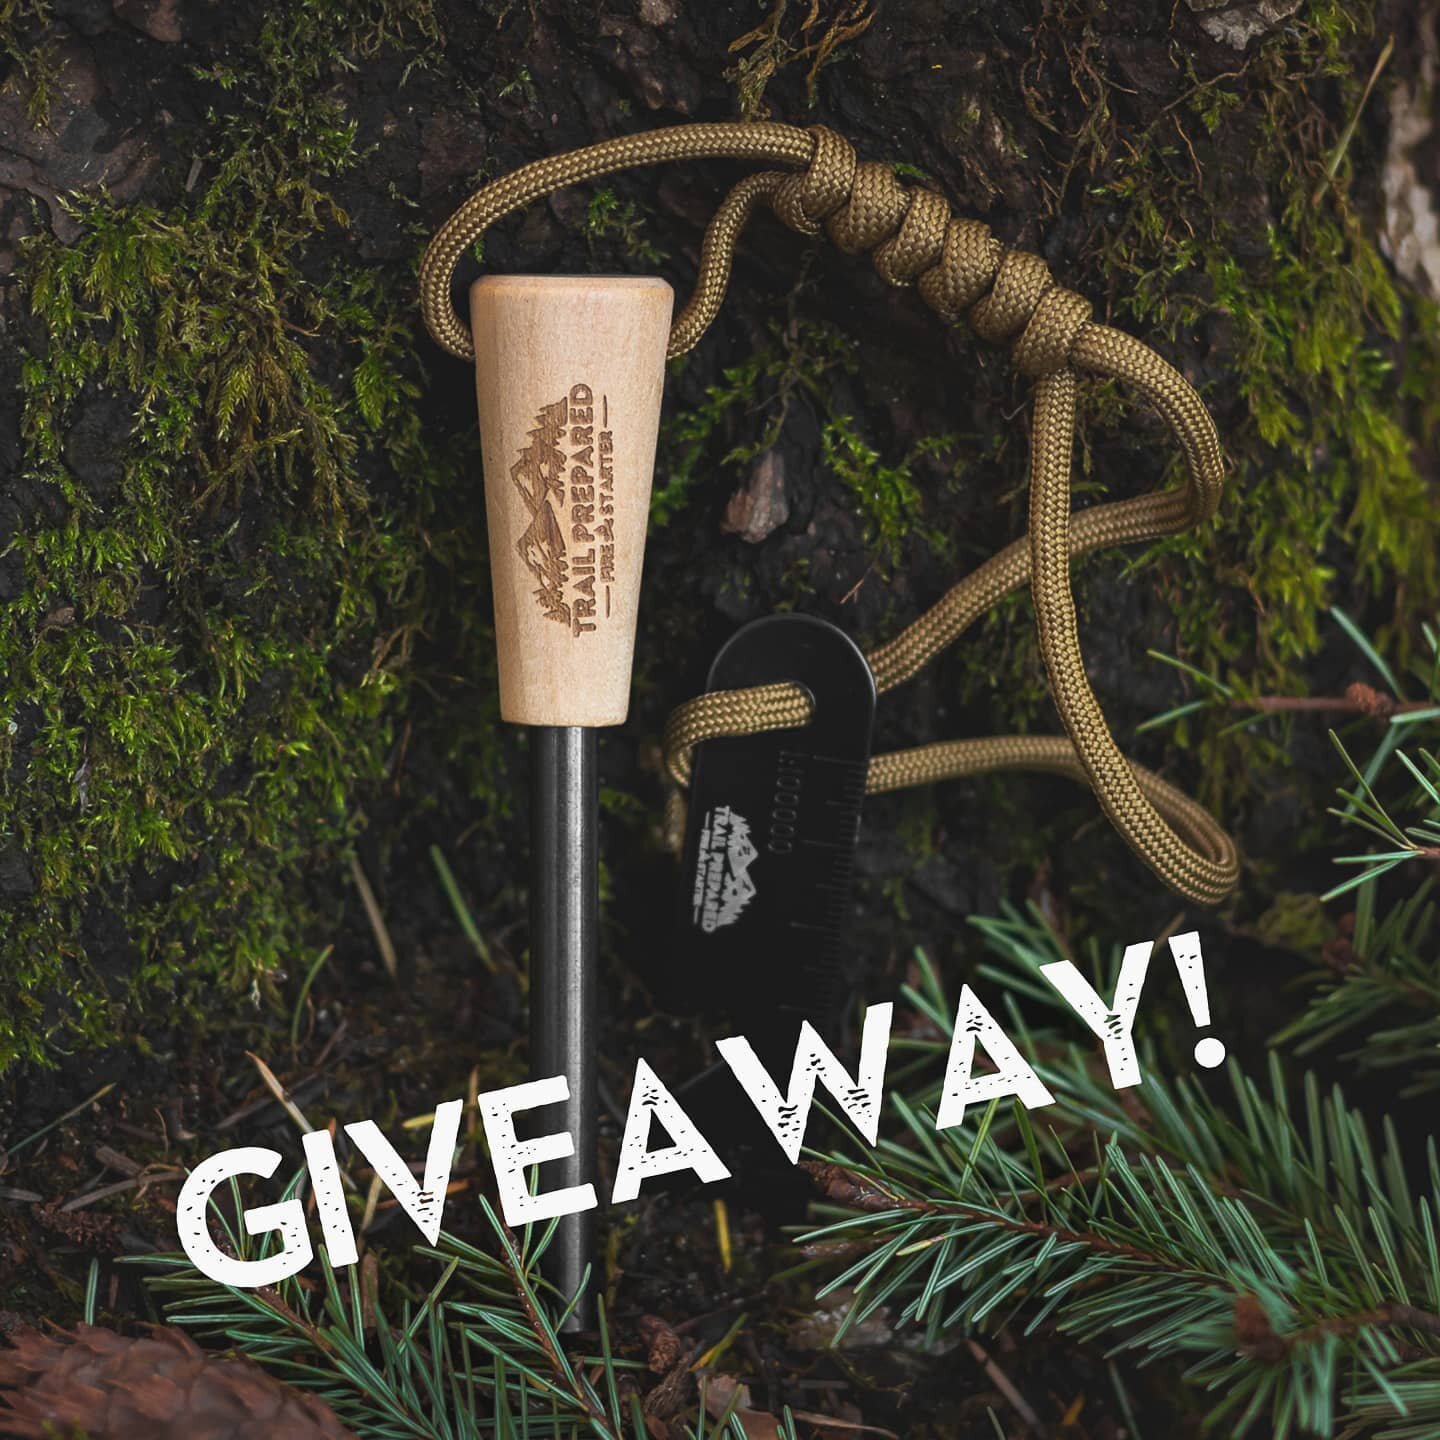 💥🚨Giveaway time!!🚨💥

Here&rsquo;s your chance to win a Trail Prepared Fire Starter, with the coyote tan paracord option!
HOW TO ENTER:
1️⃣ Follow us @TrailPrepared. 
2️⃣ Like this post. 
3️⃣ Tag a fellow outdoorsman.

-NO PURCHASE OR PAYMENT NECE